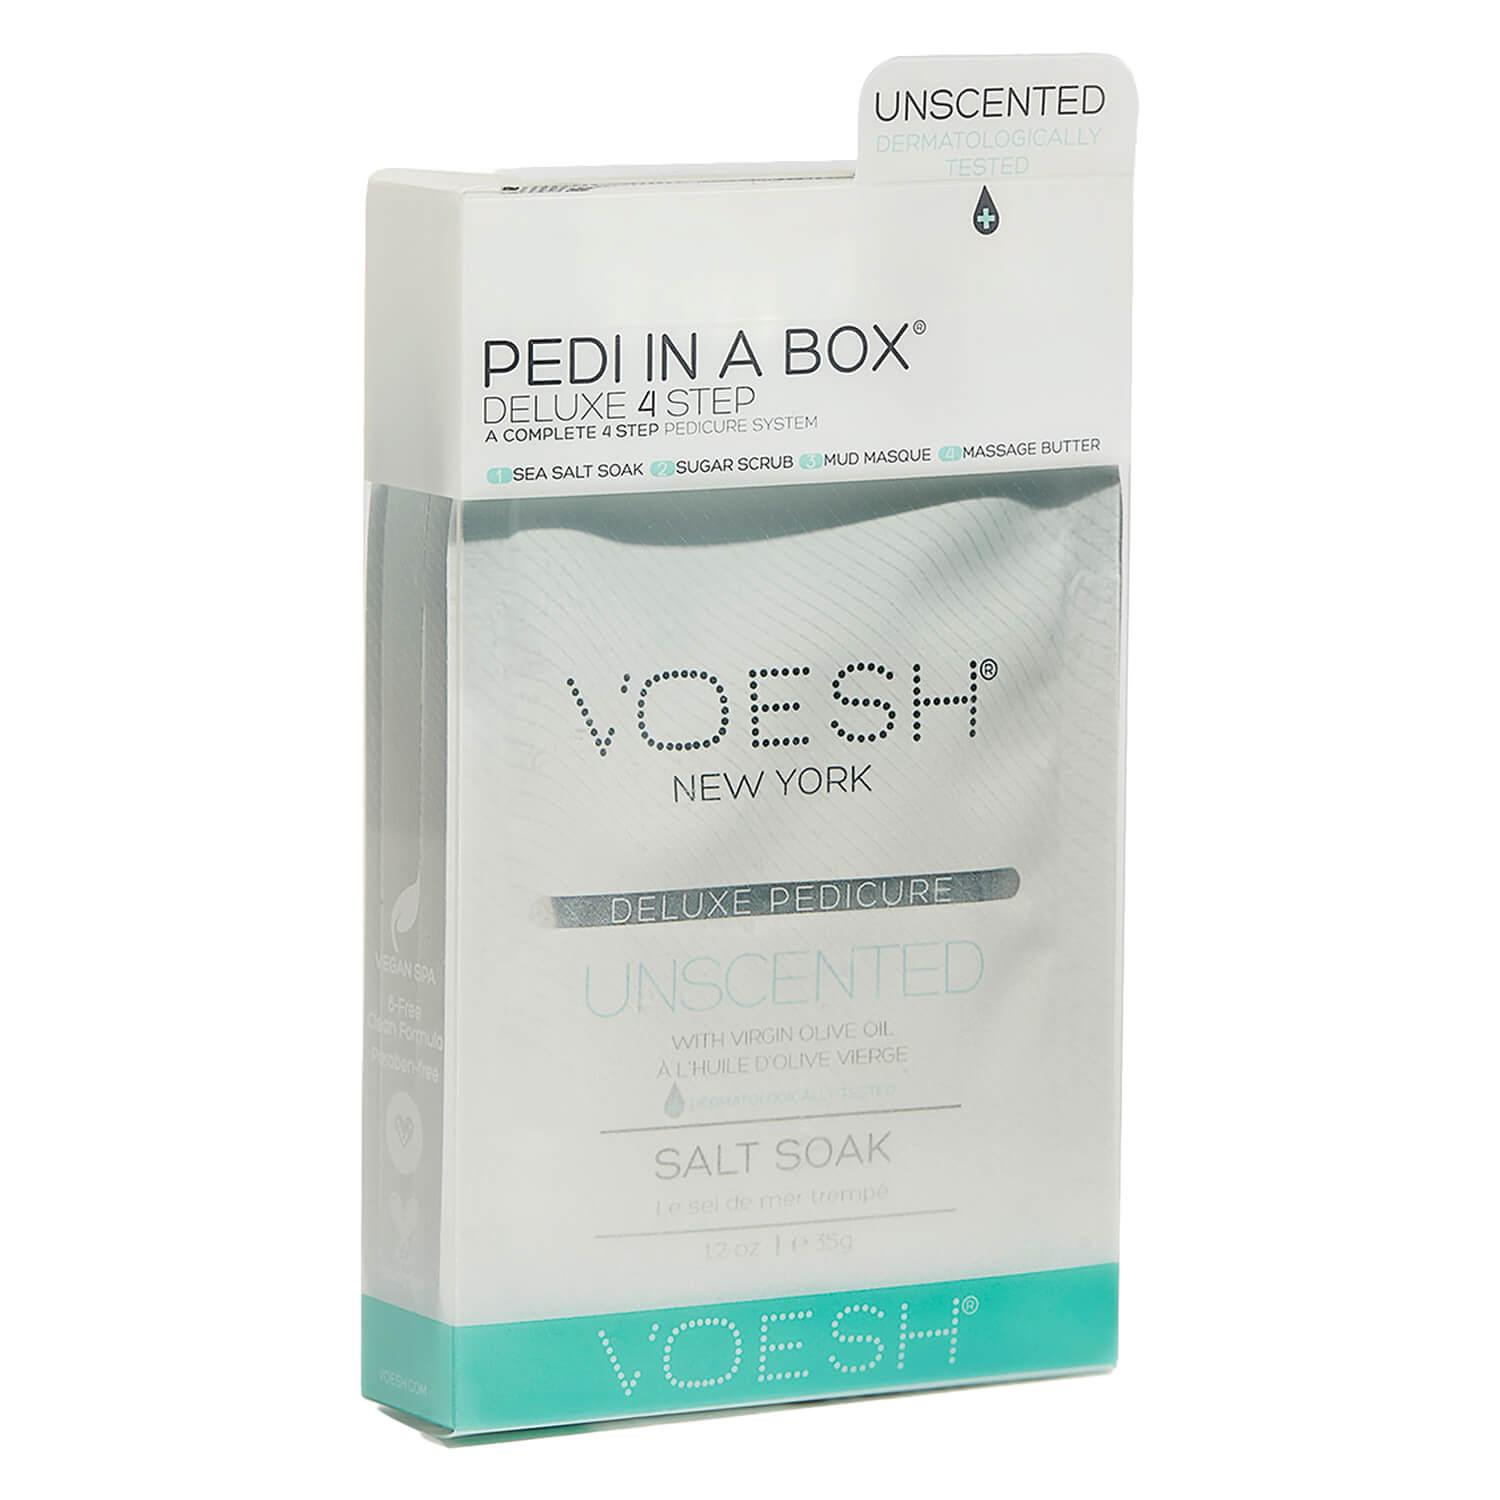 VOESH New York - Pedi In A Box 4 Step Unscented